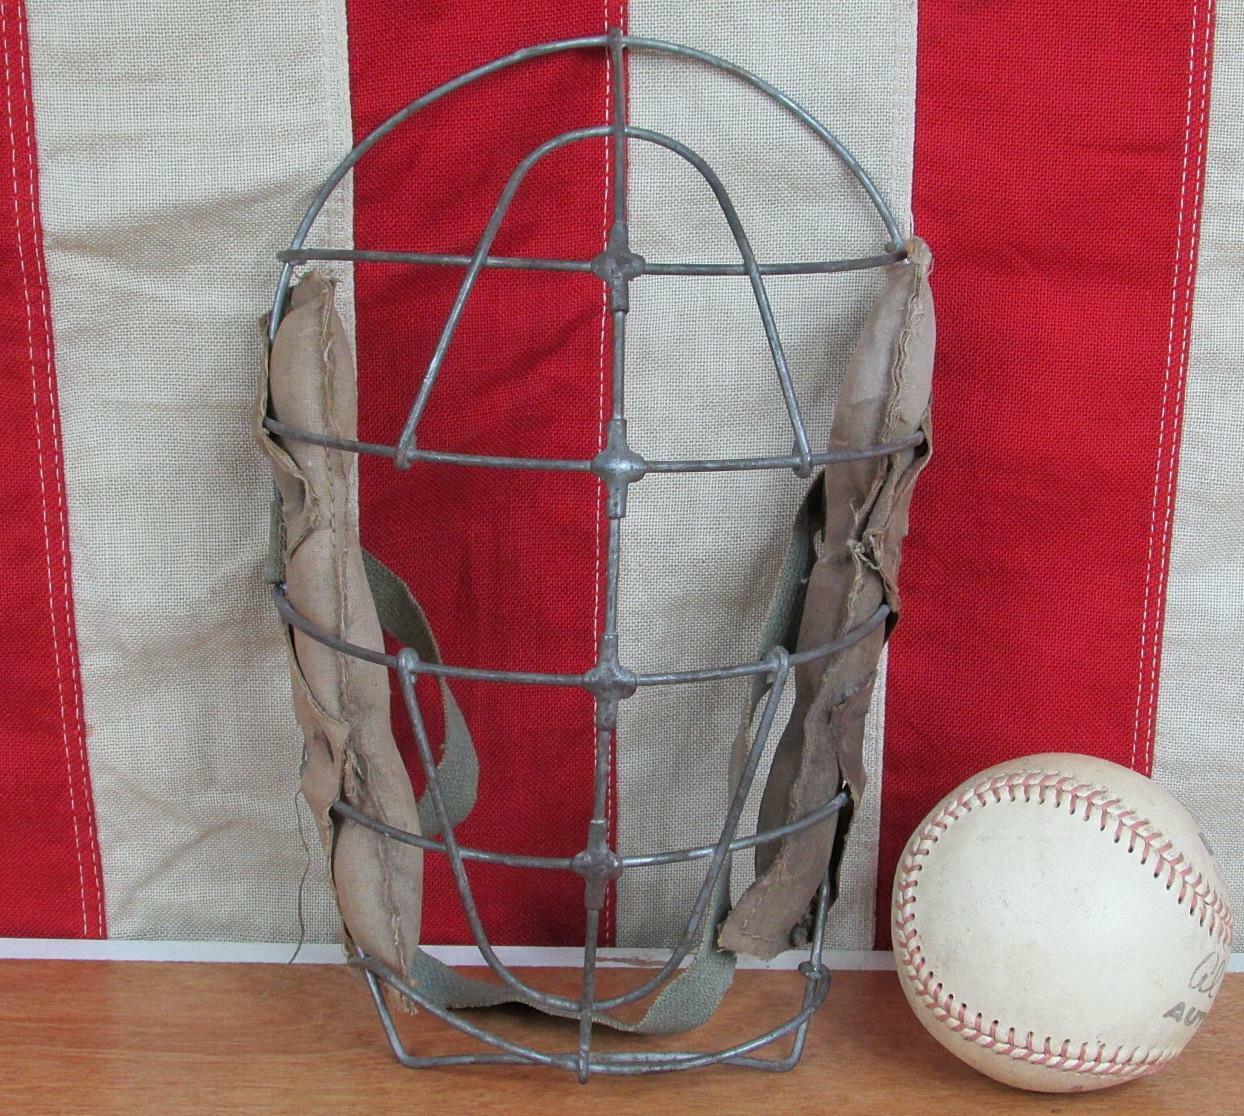 Vintage Antique Baseball Catchers Face Mask Unique Youth Size Rare Great Display